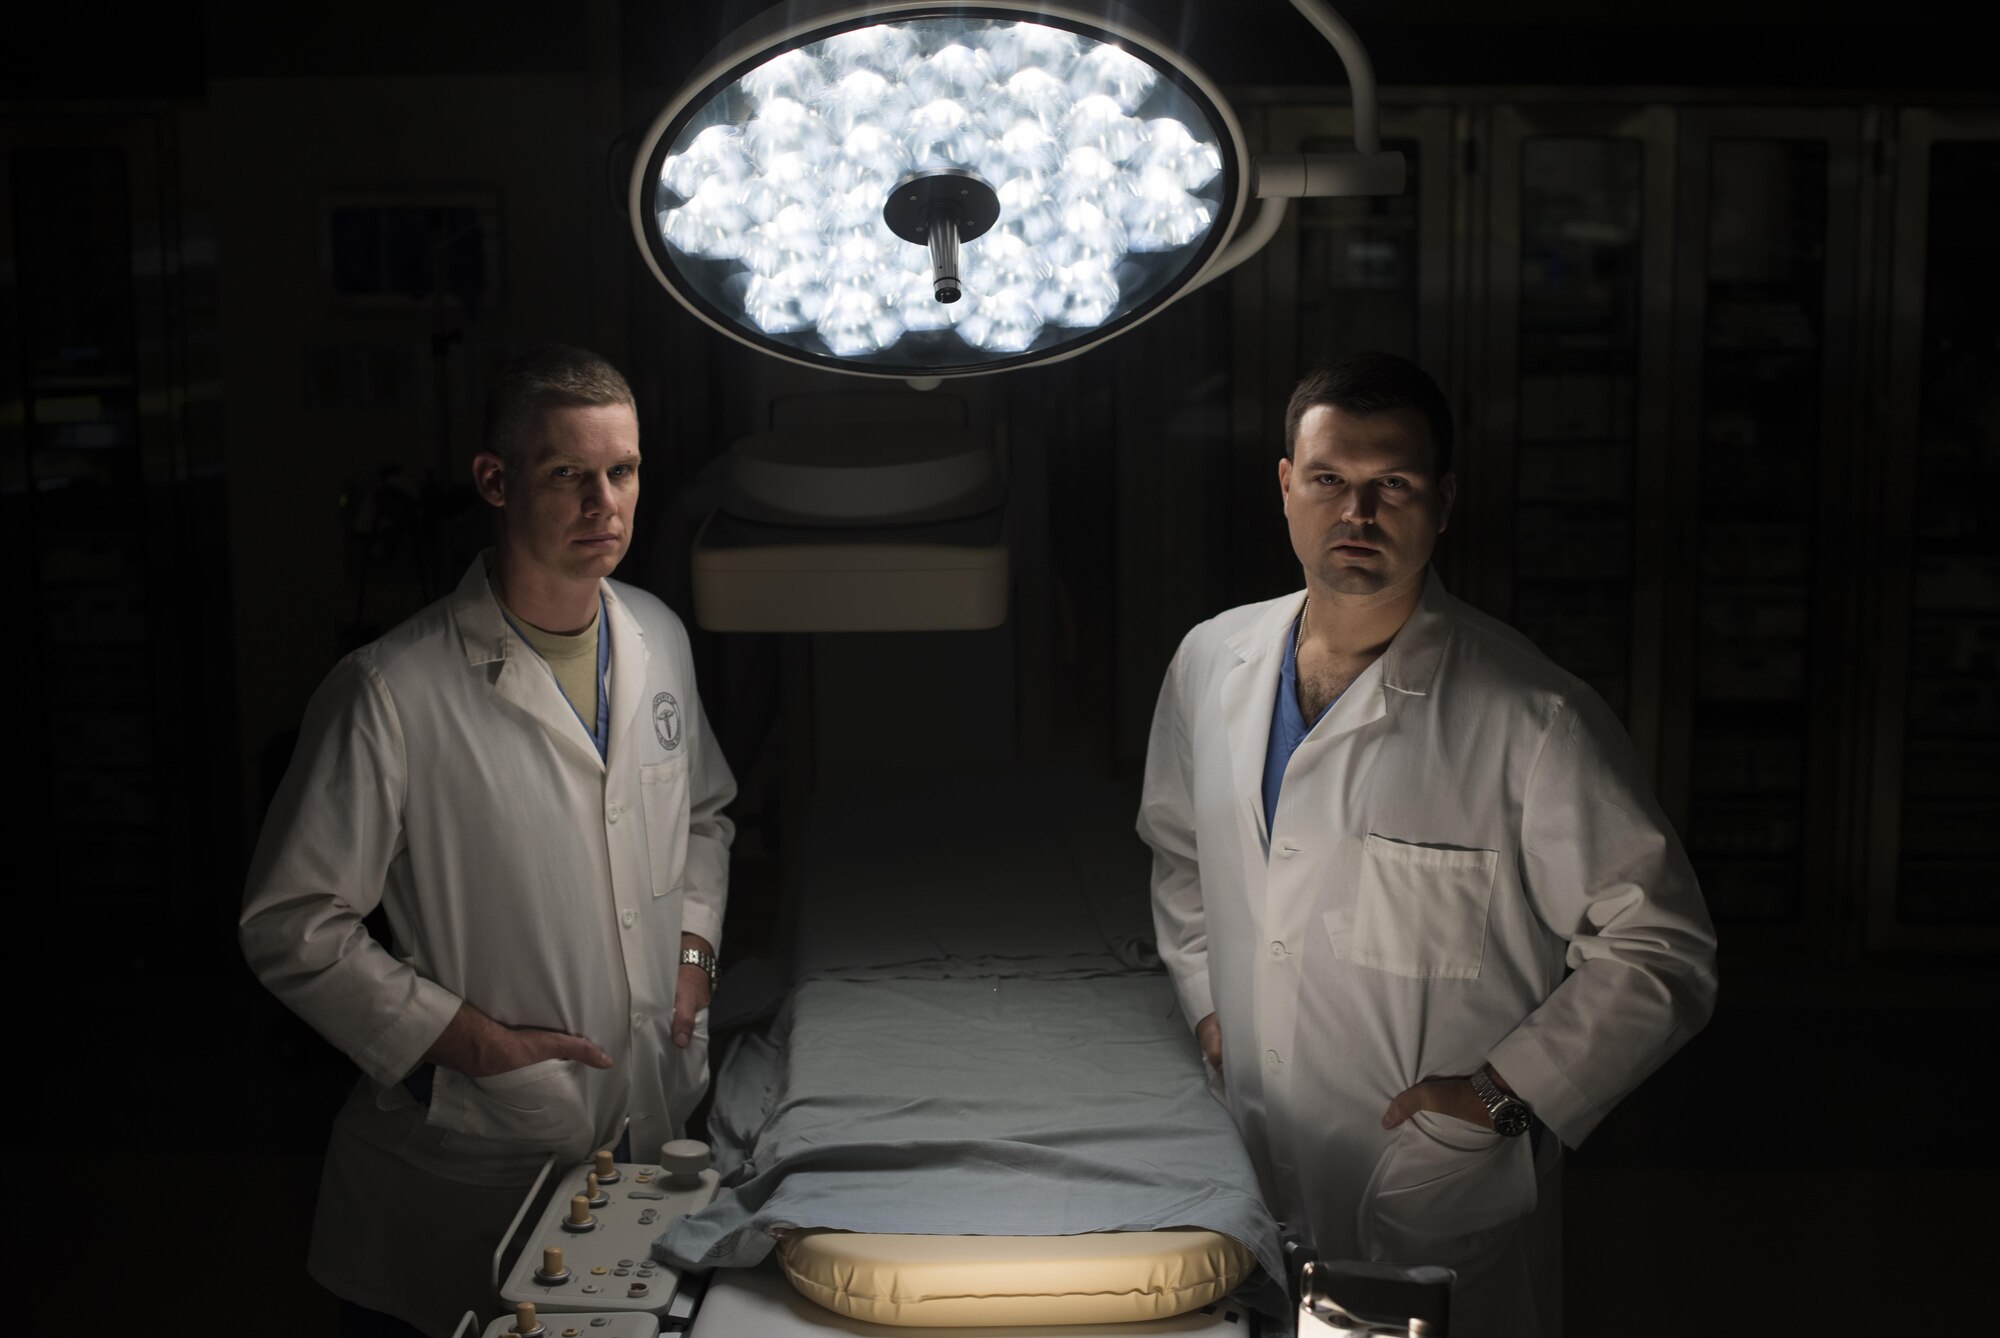 Lt. Col. Jason Compton and Maj. Charles Chesnut, 99th Medical Group general surgeons, pose for a portrait in the Mike O’Callaghan Military Medical Center at Nellis Air Force Base, Nev., Oct. 3, 2017. The surgeons were two members of the team that took in trauma patients at the University Medical Center of Southern Nevada during the Las Vegas shooting, Oct. 1, 2017.  (U.S. Air Force photo by Senior Airman Kevin Tanenbaum)